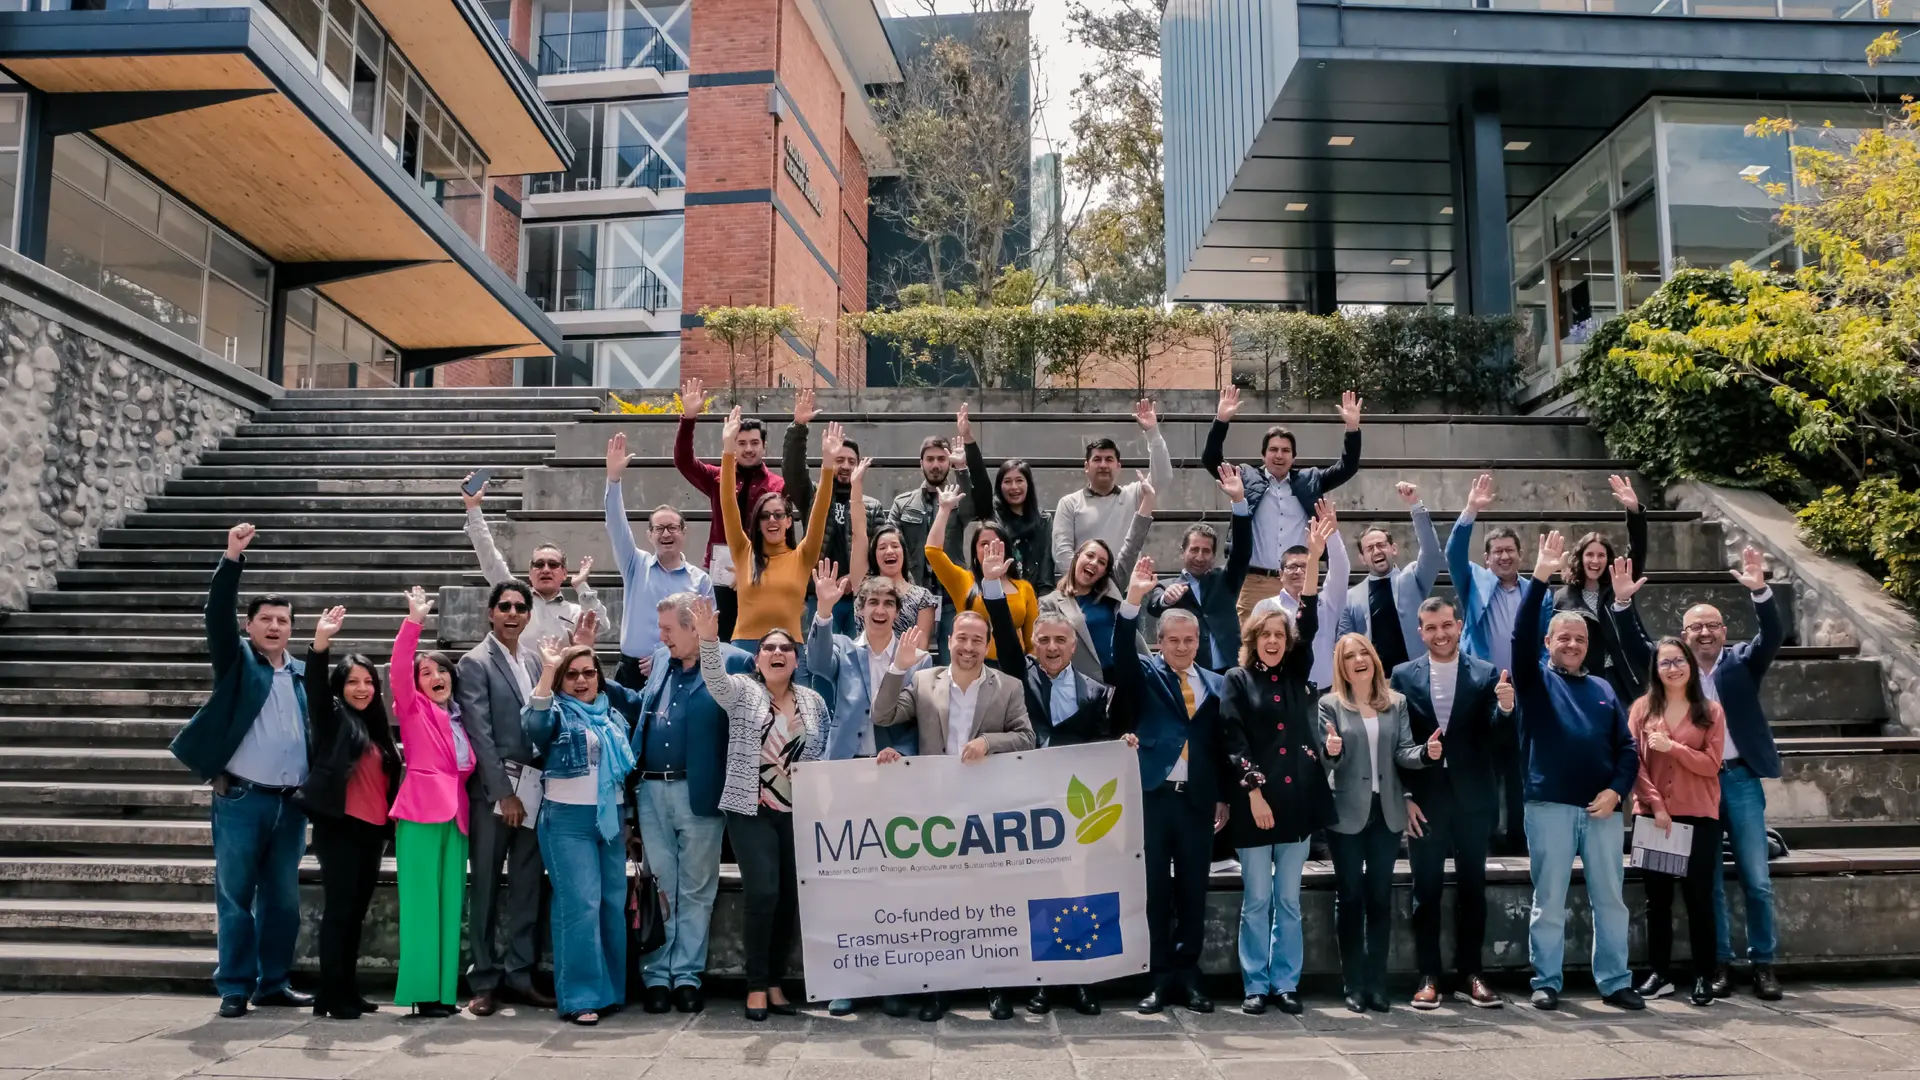 MACCARD culminates with international recognition. An experience worthy of the world